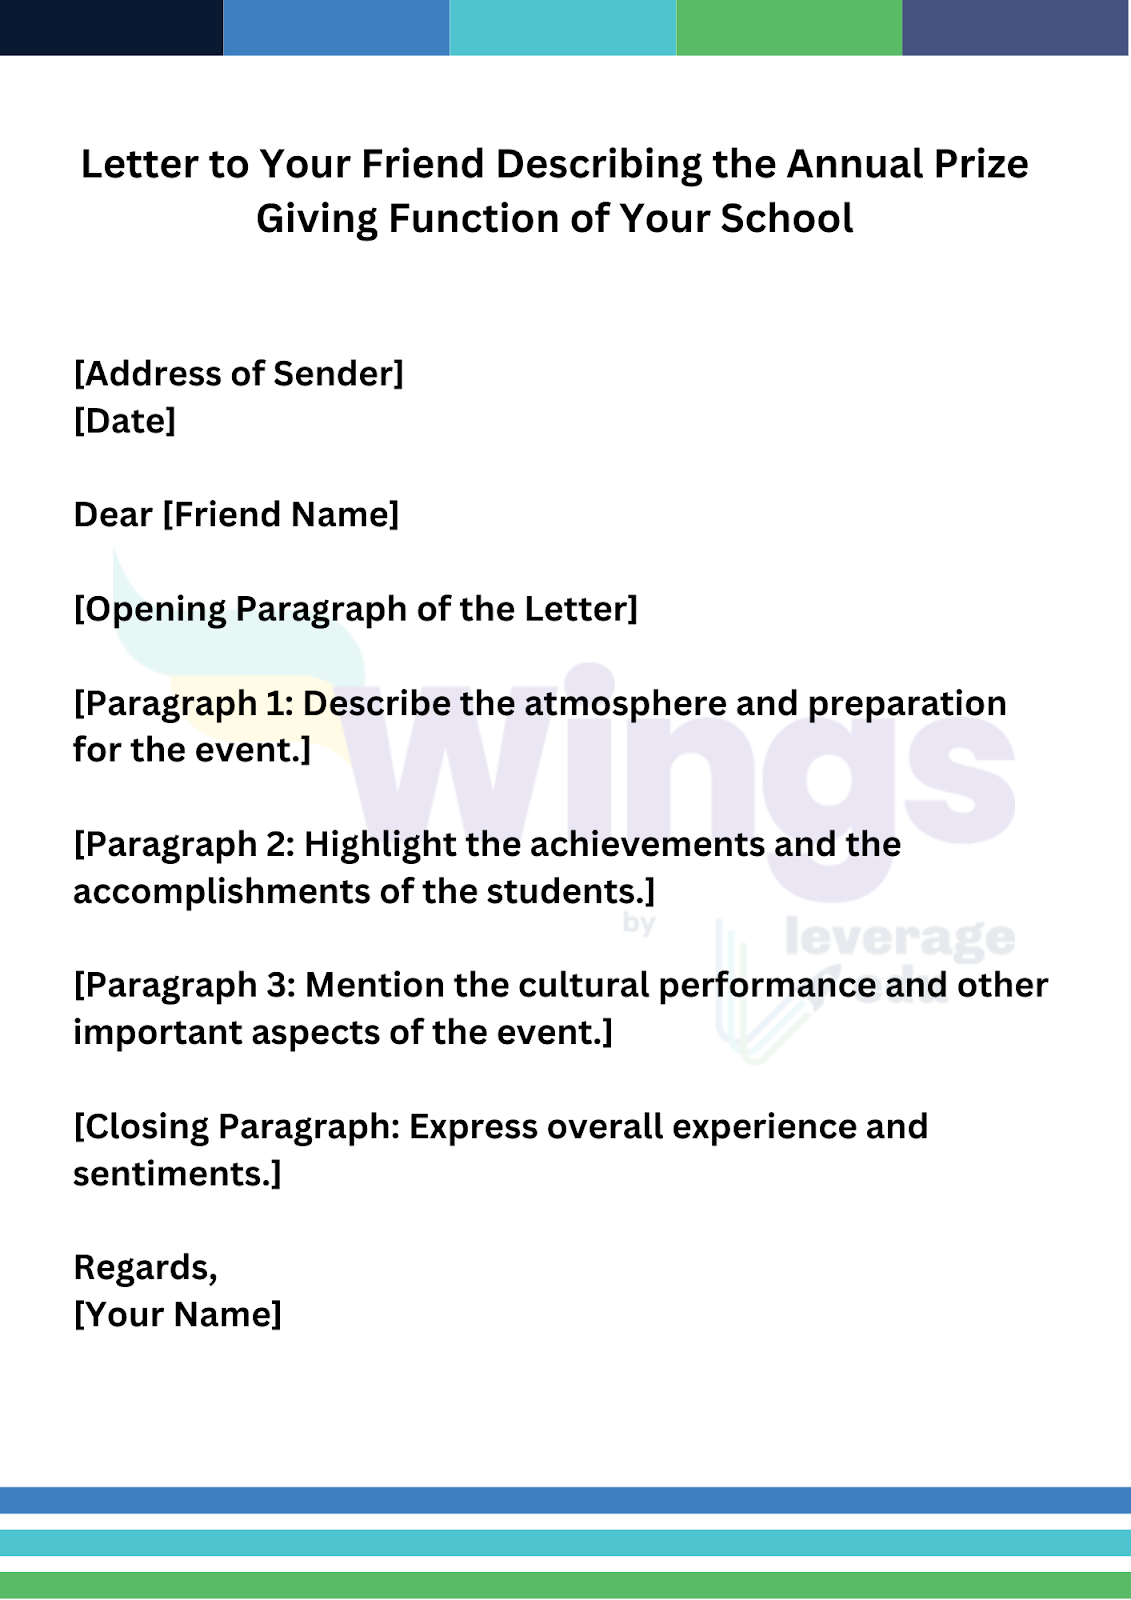 Write a Letter to Your Friend Describing the Annual Prize Giving Function of Your School
